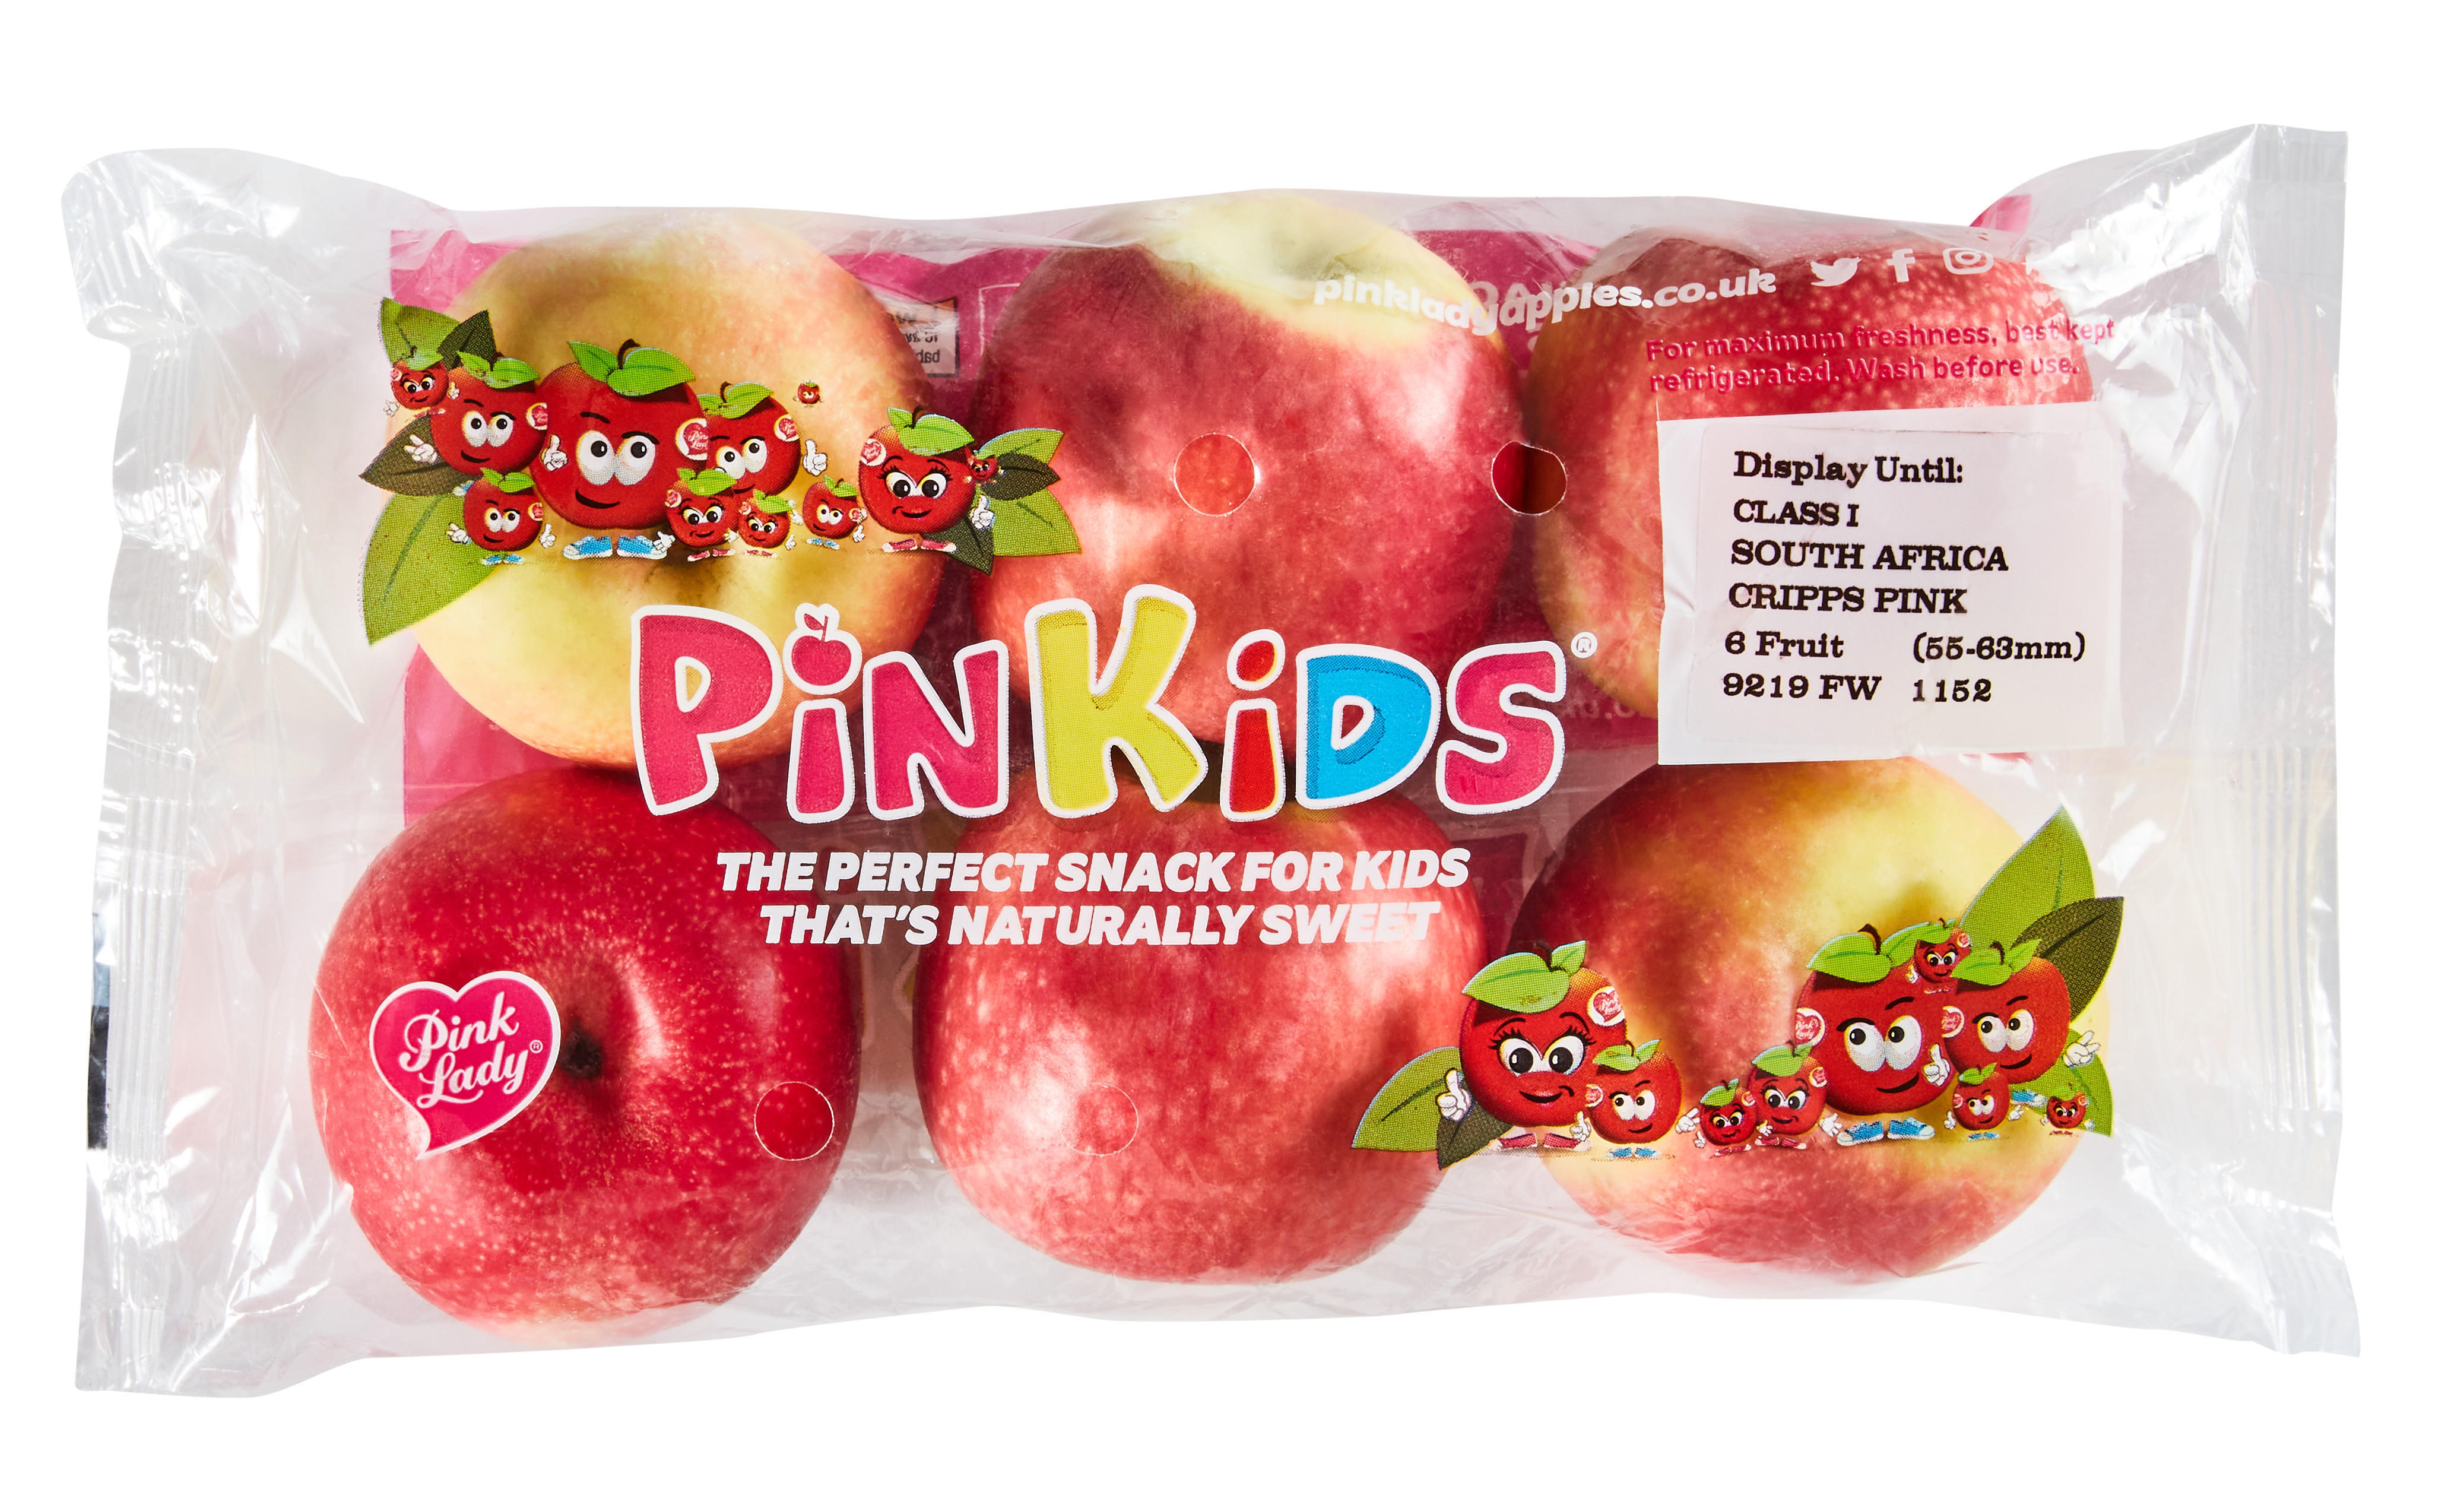 Pinkids Pink Lady Apples 6 Pack, Fresh Fruit